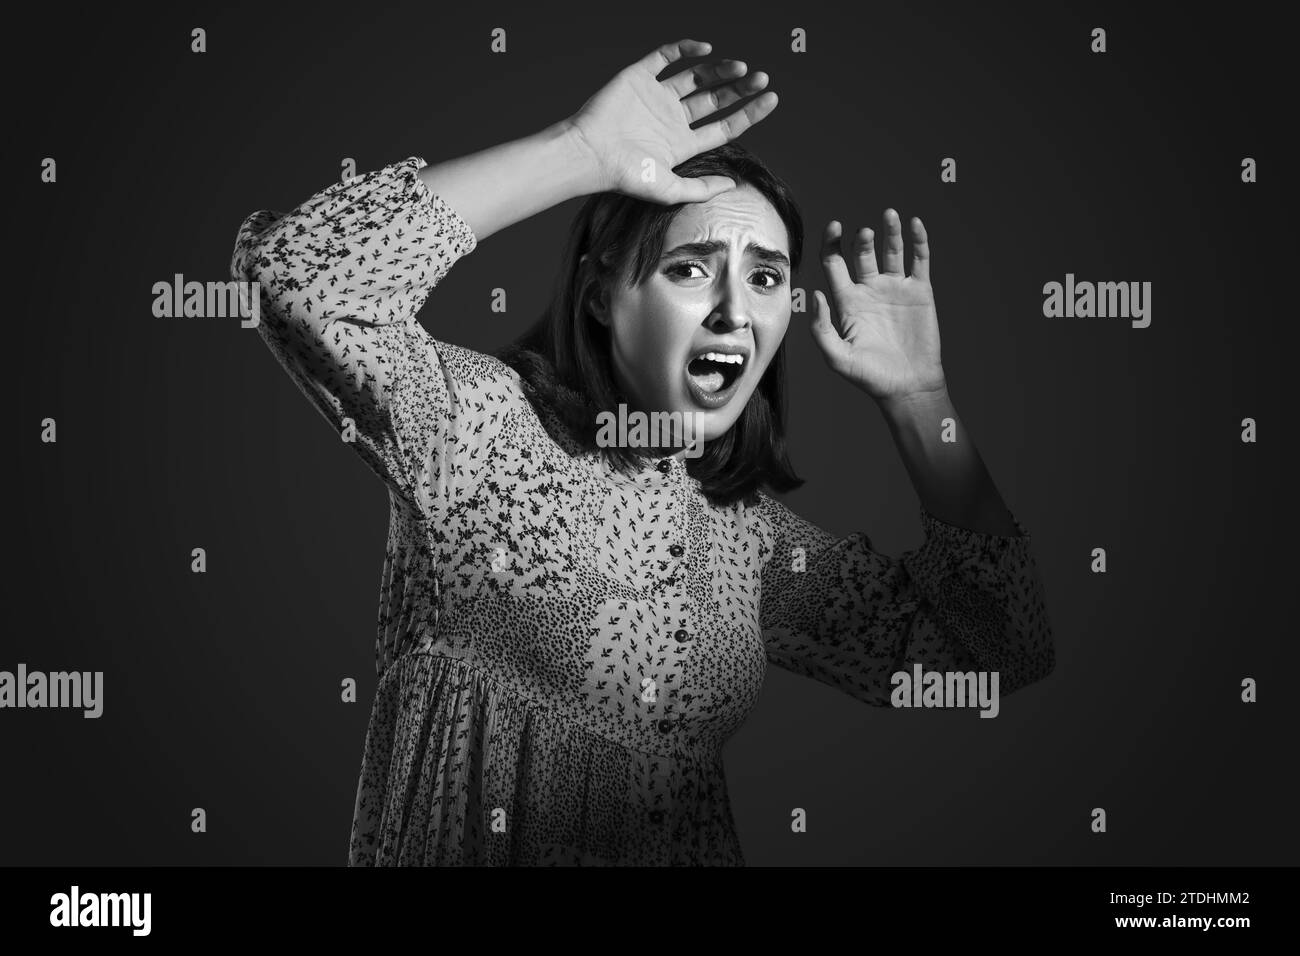 Beautiful young afraid woman screaming on black background Stock Photo